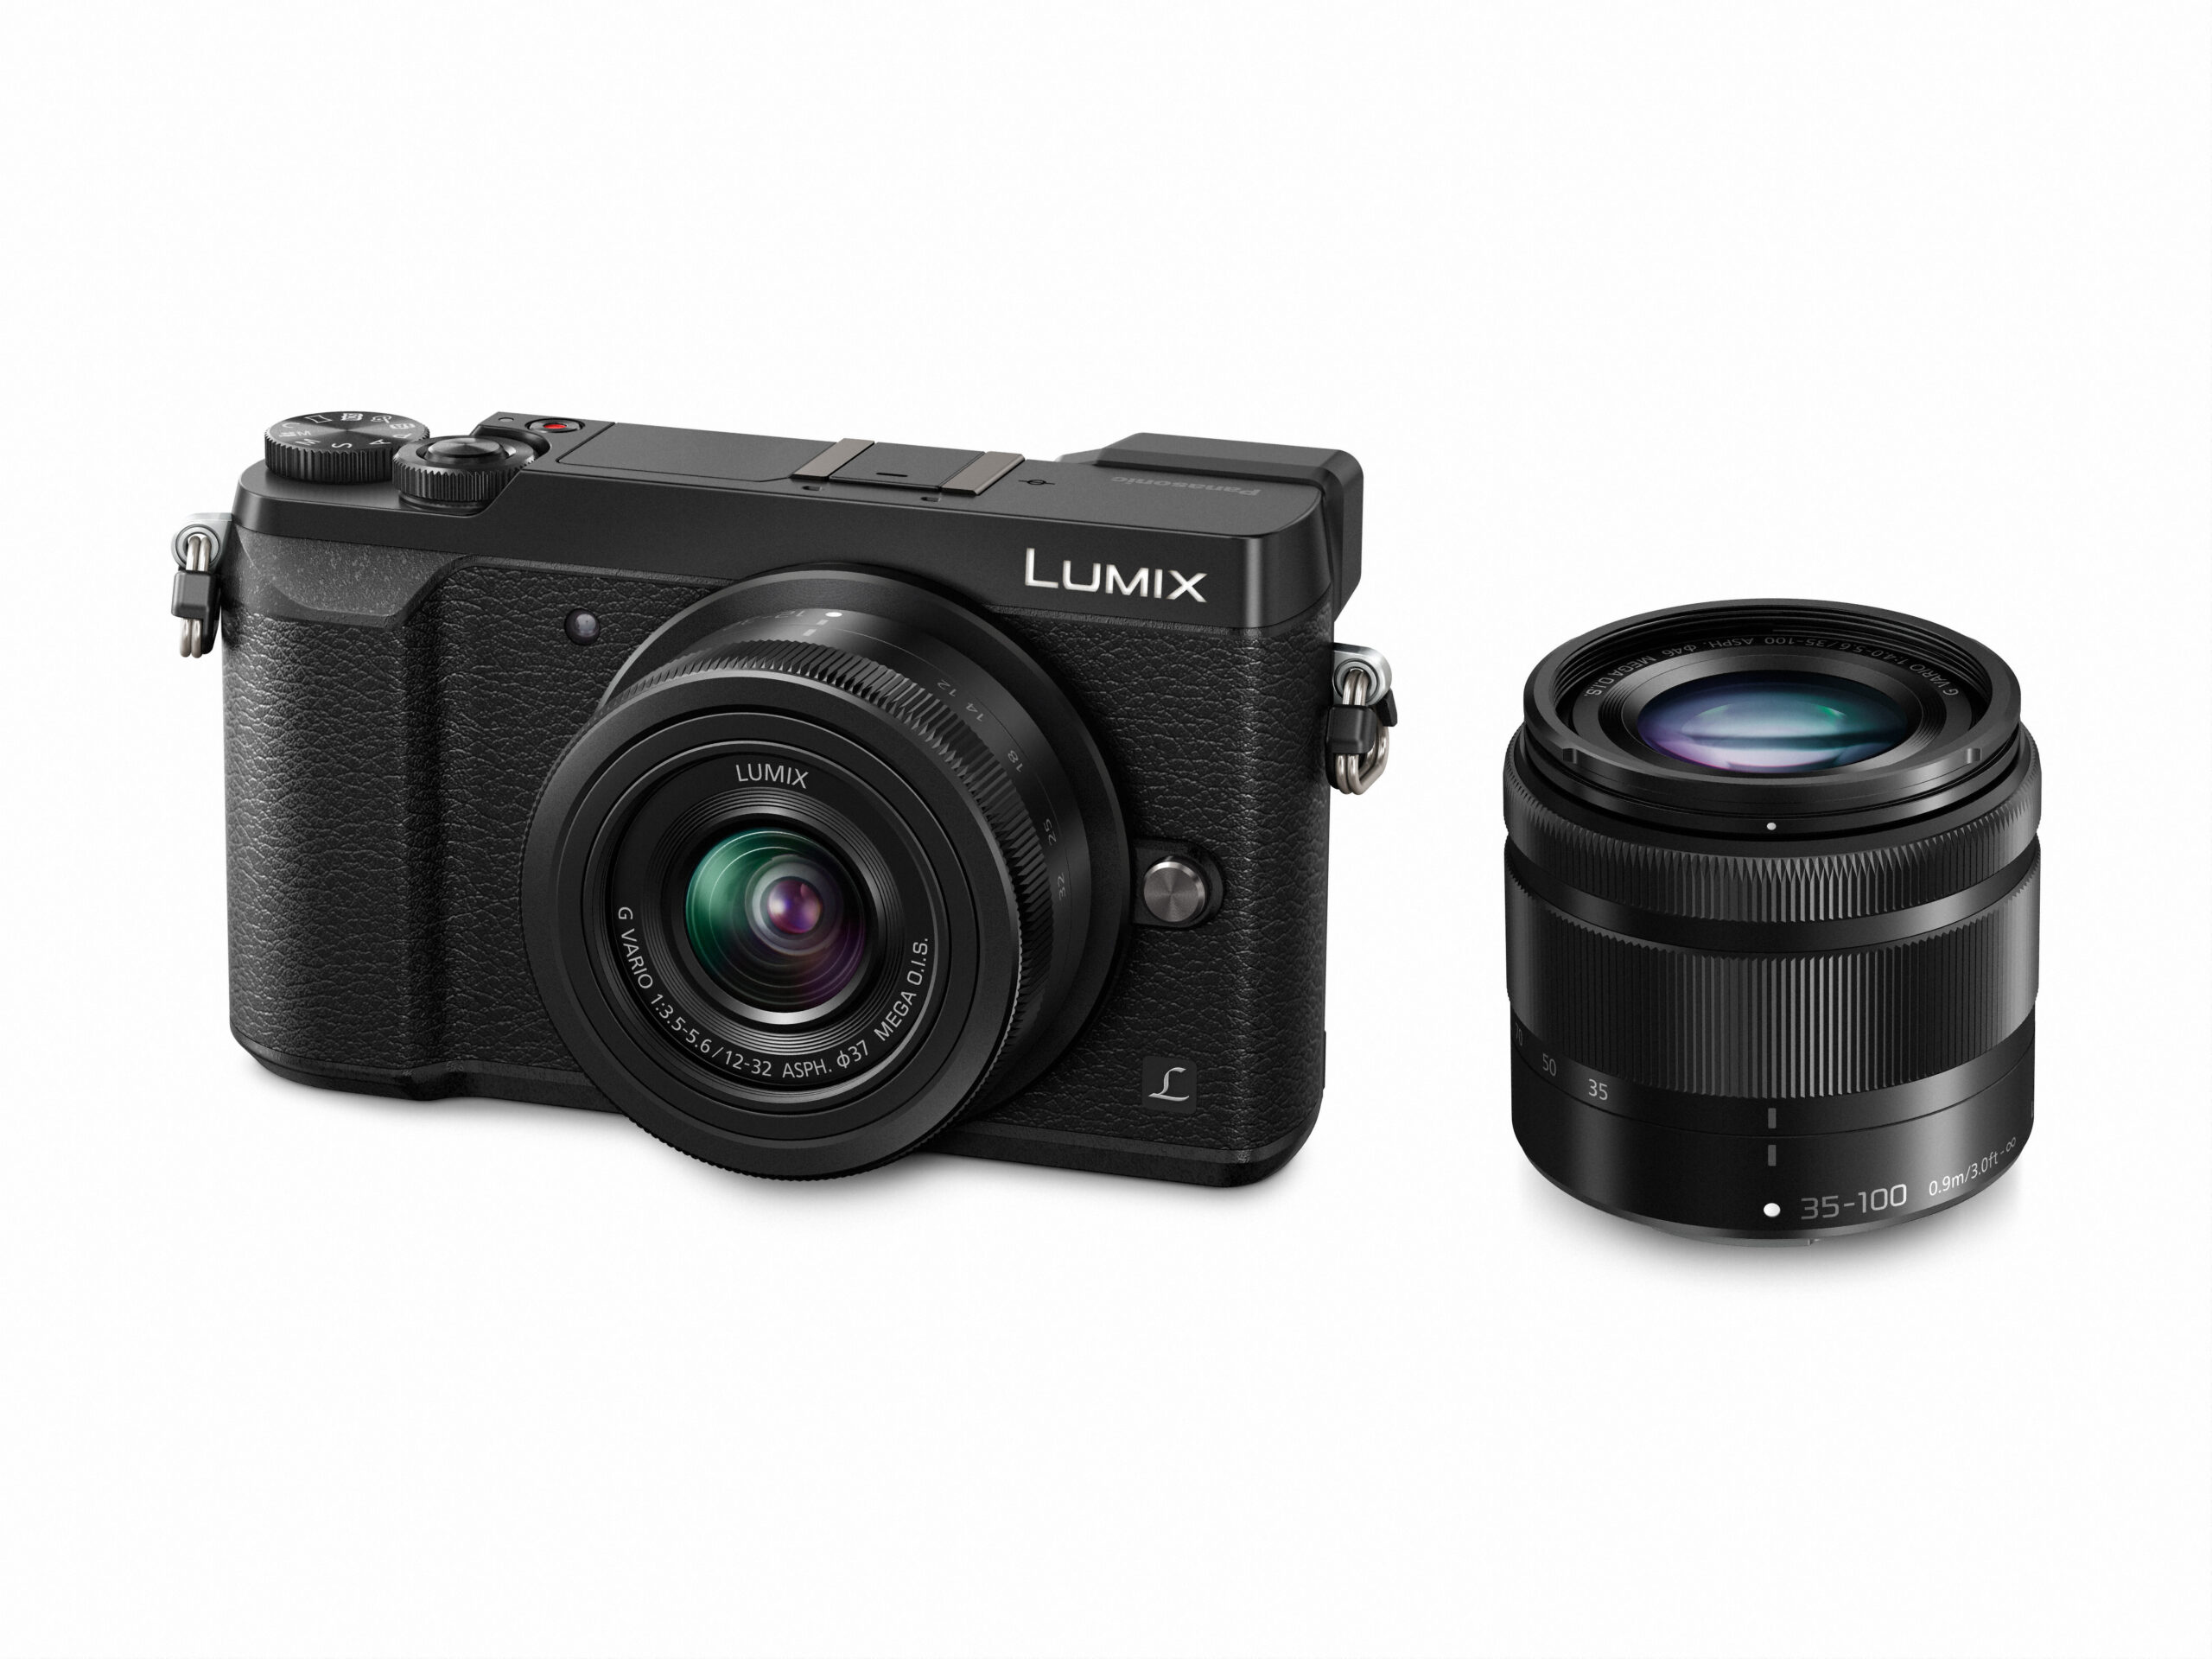 A compact camera with a full range of Leica-branded lenses: The Panasonic GX80